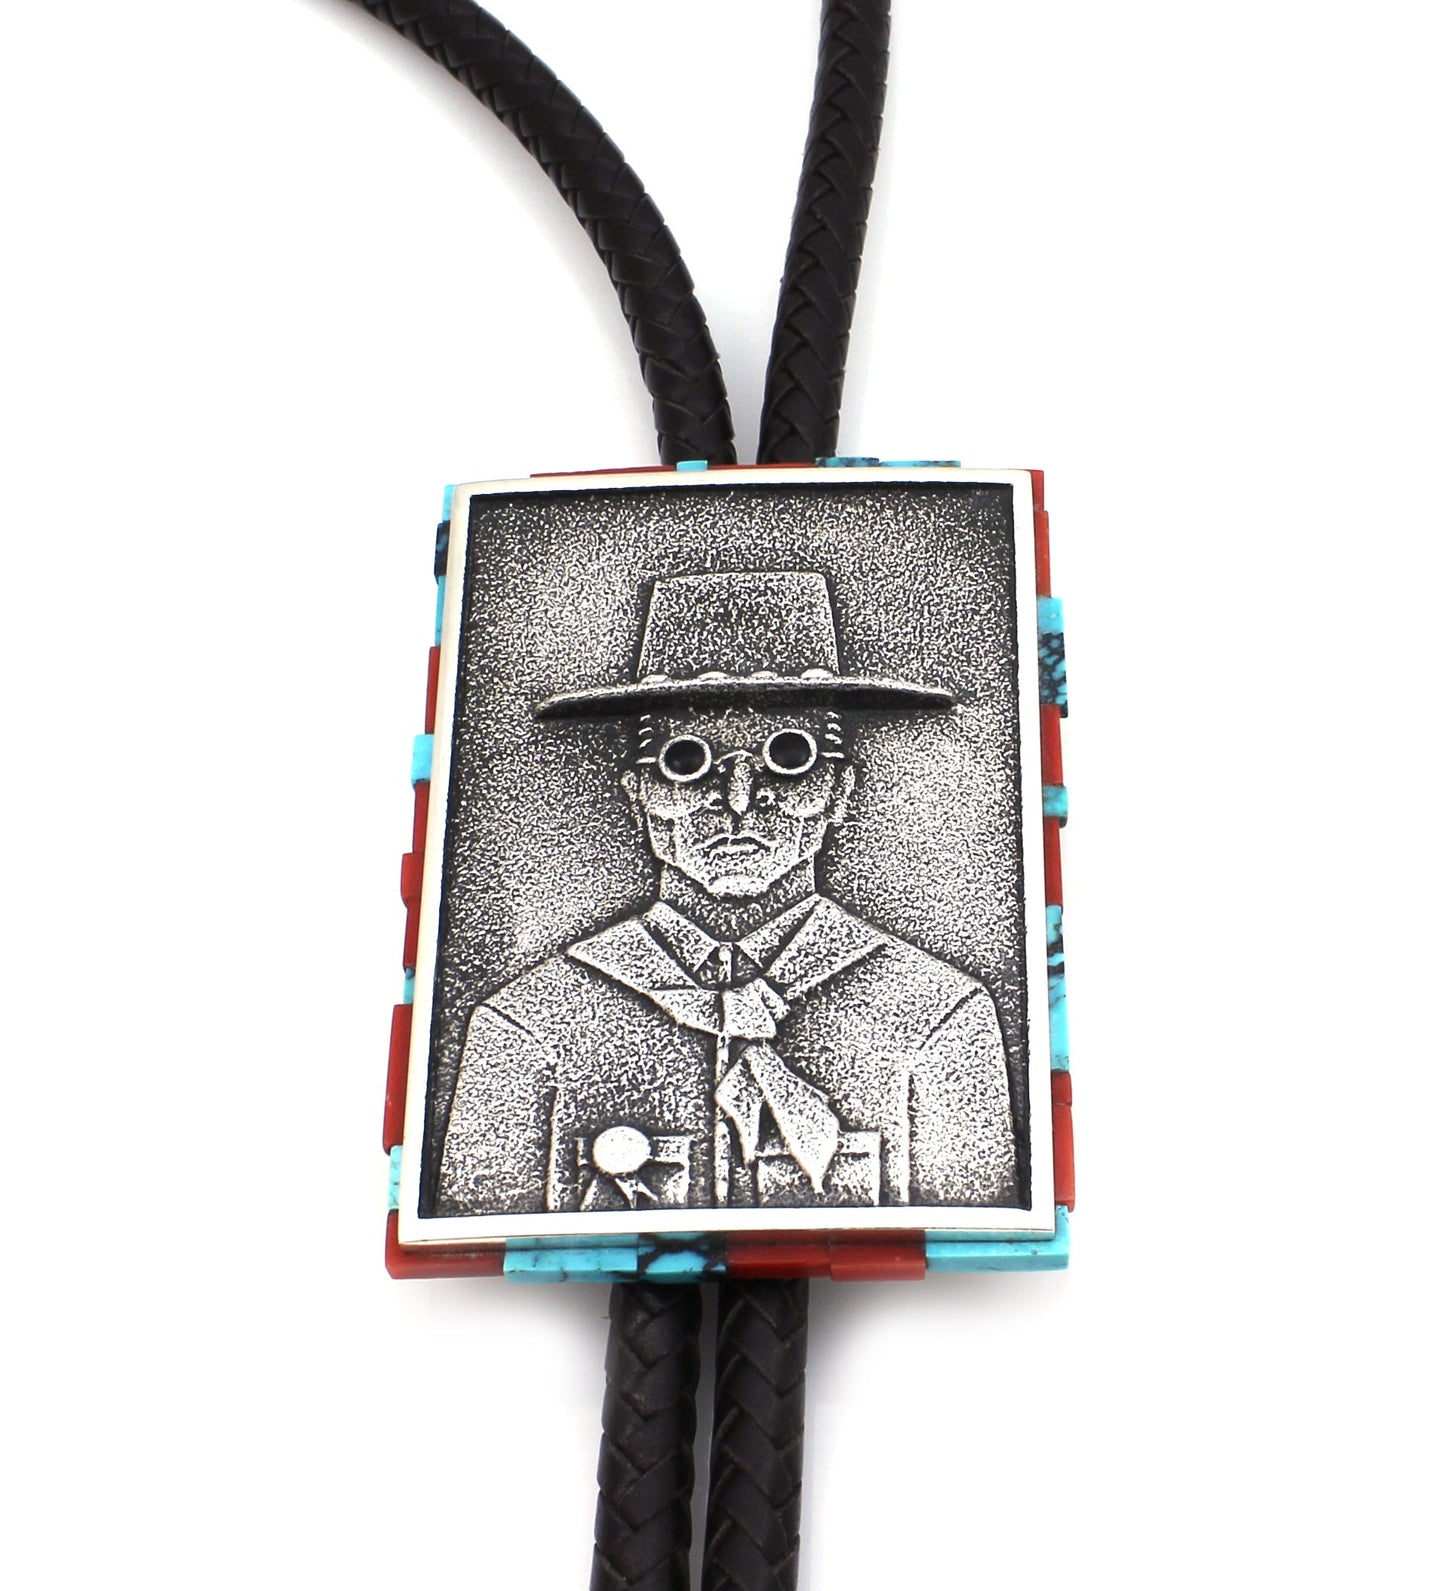 Father Son Collaboration - Crow Indian with Sunglasses Bolo Tie-Jewelry-Darryl Dean & Robert Begay-Sorrel Sky Gallery